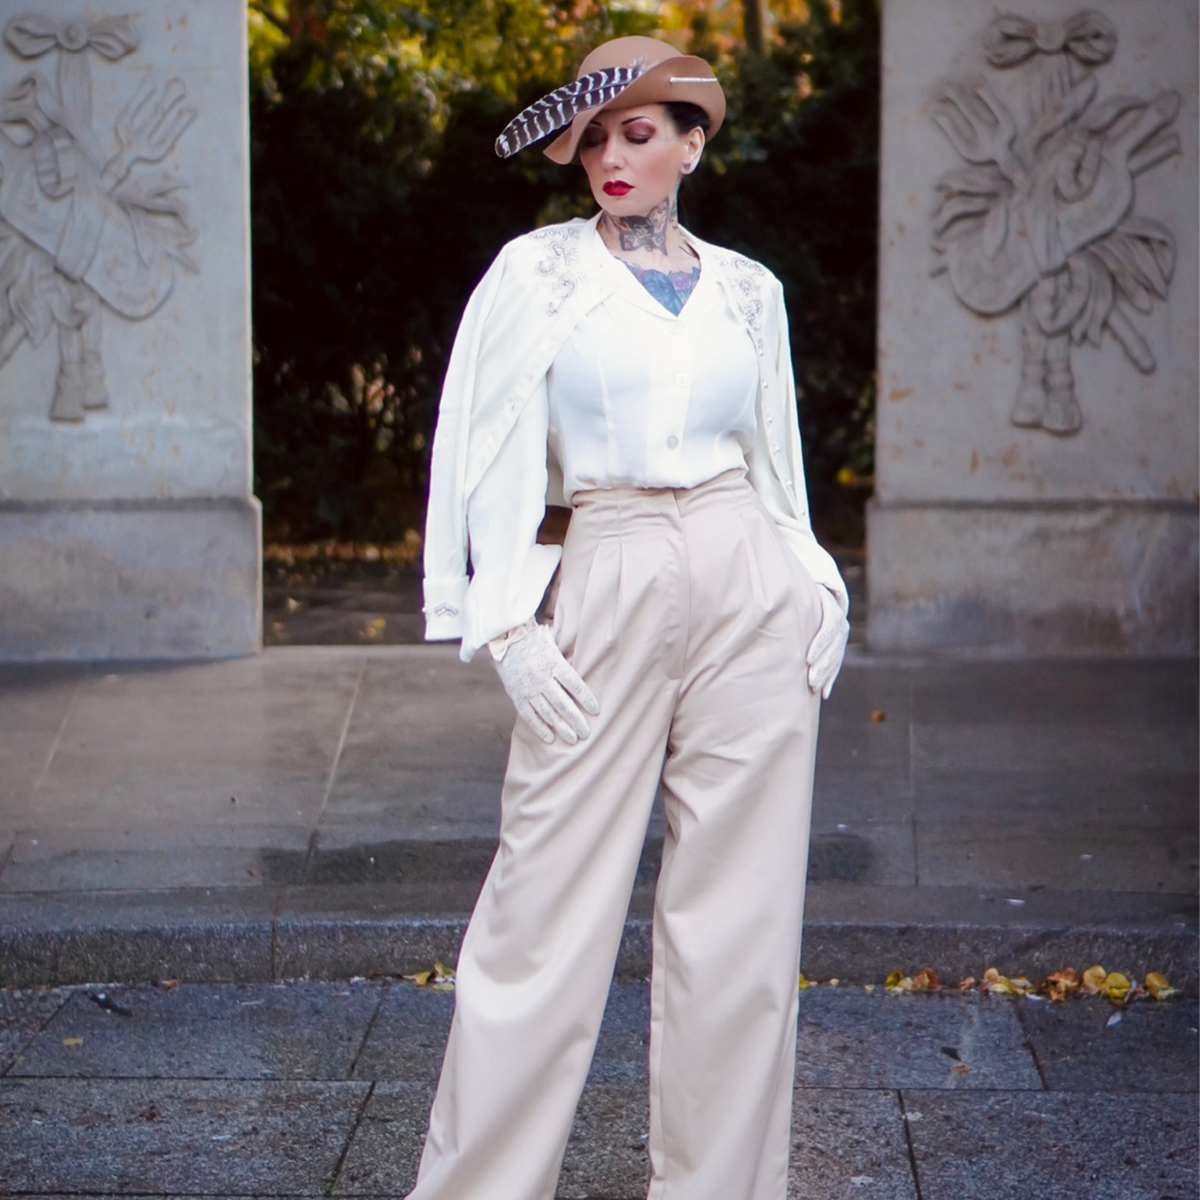 Tailored Audrey Trousers in Burgundy